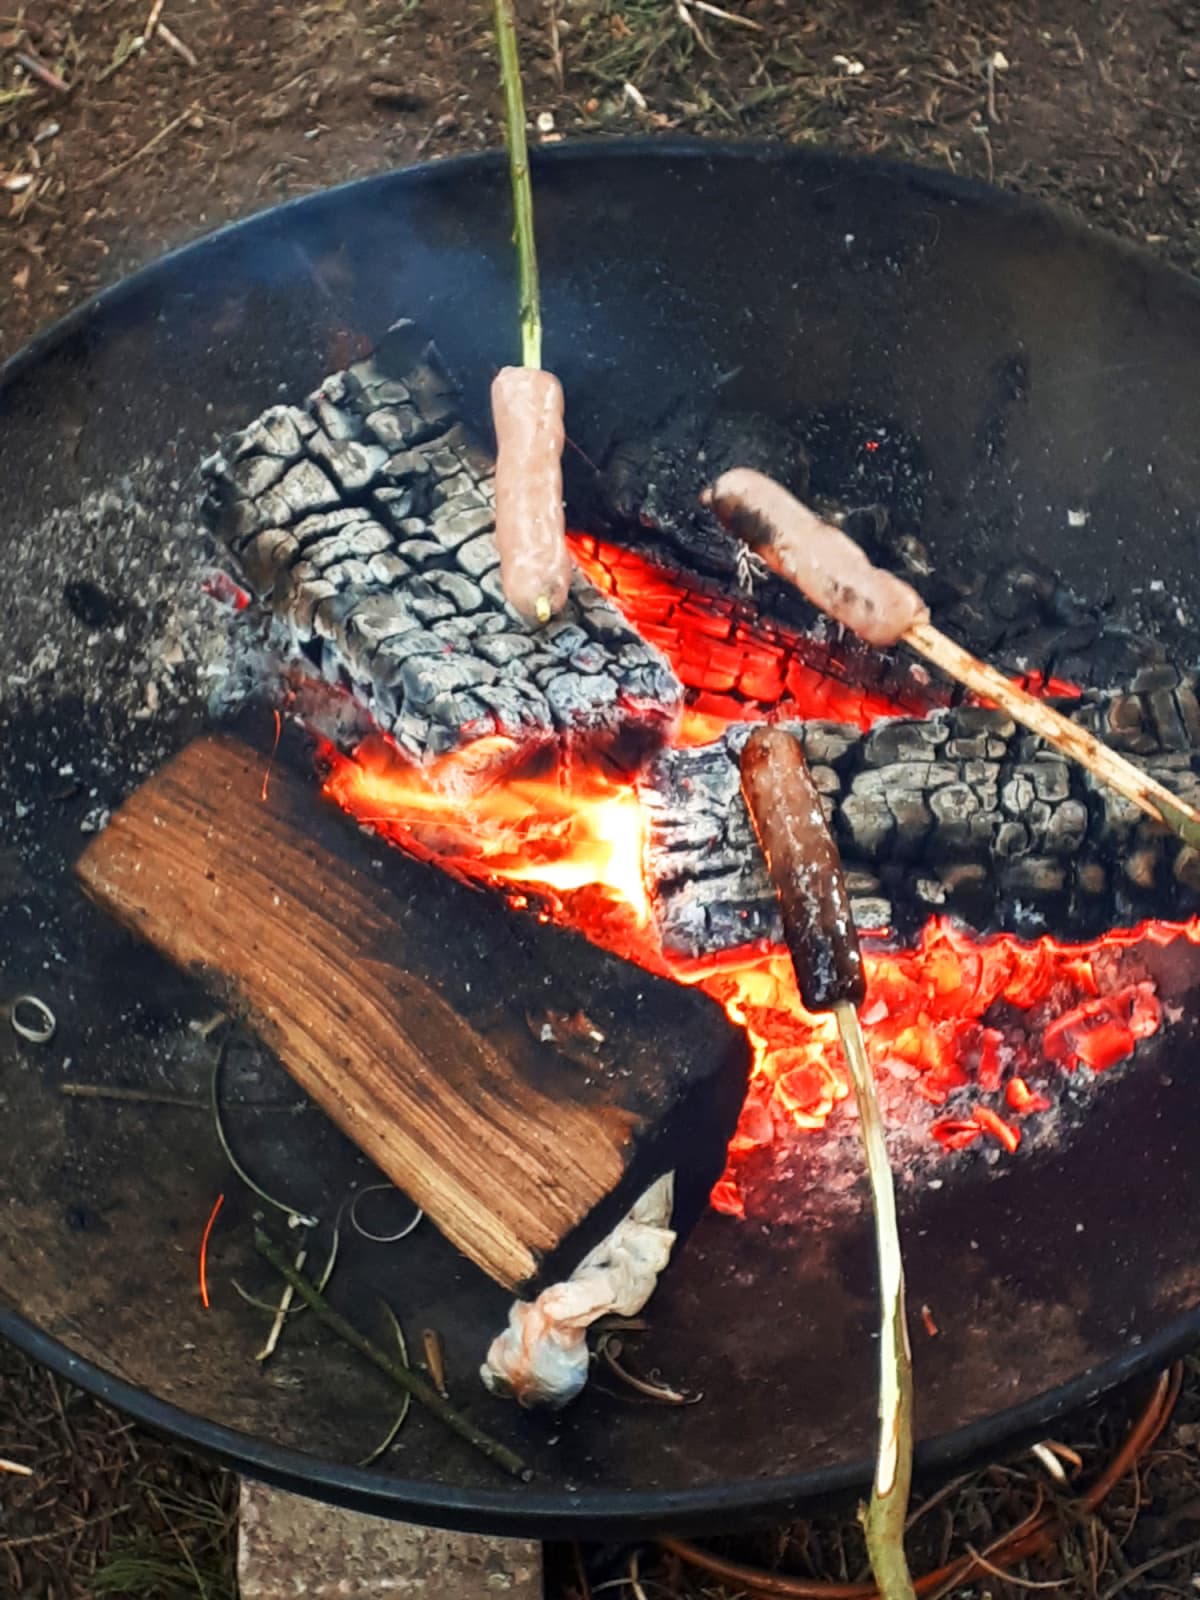 Sausages on willow sticks being cooked on a campfire